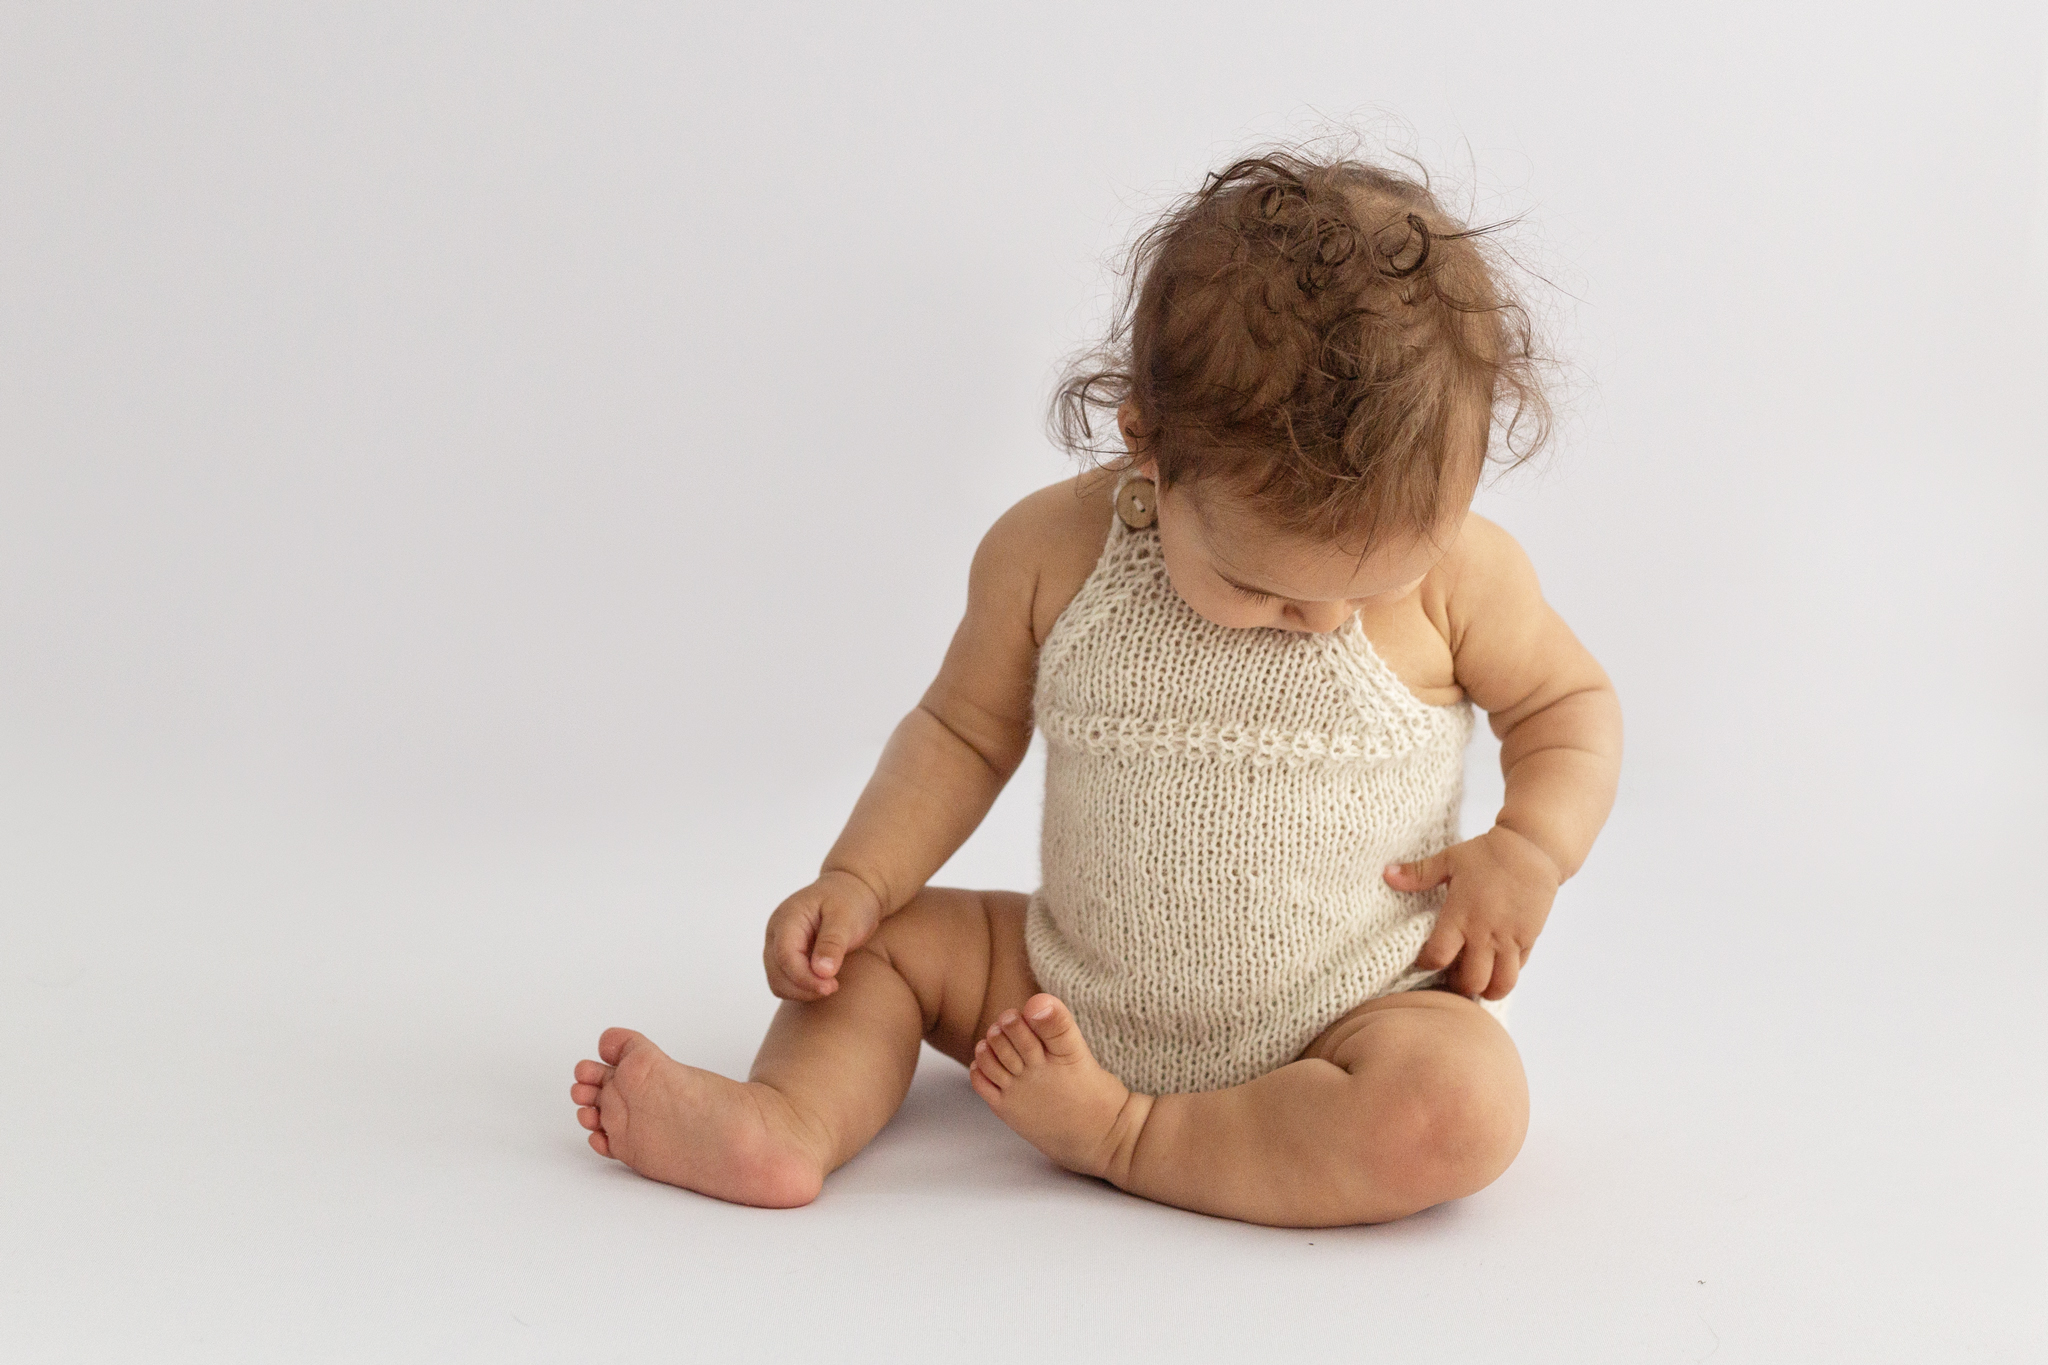 Baby girl with dark hair in knitted romper during sitter session